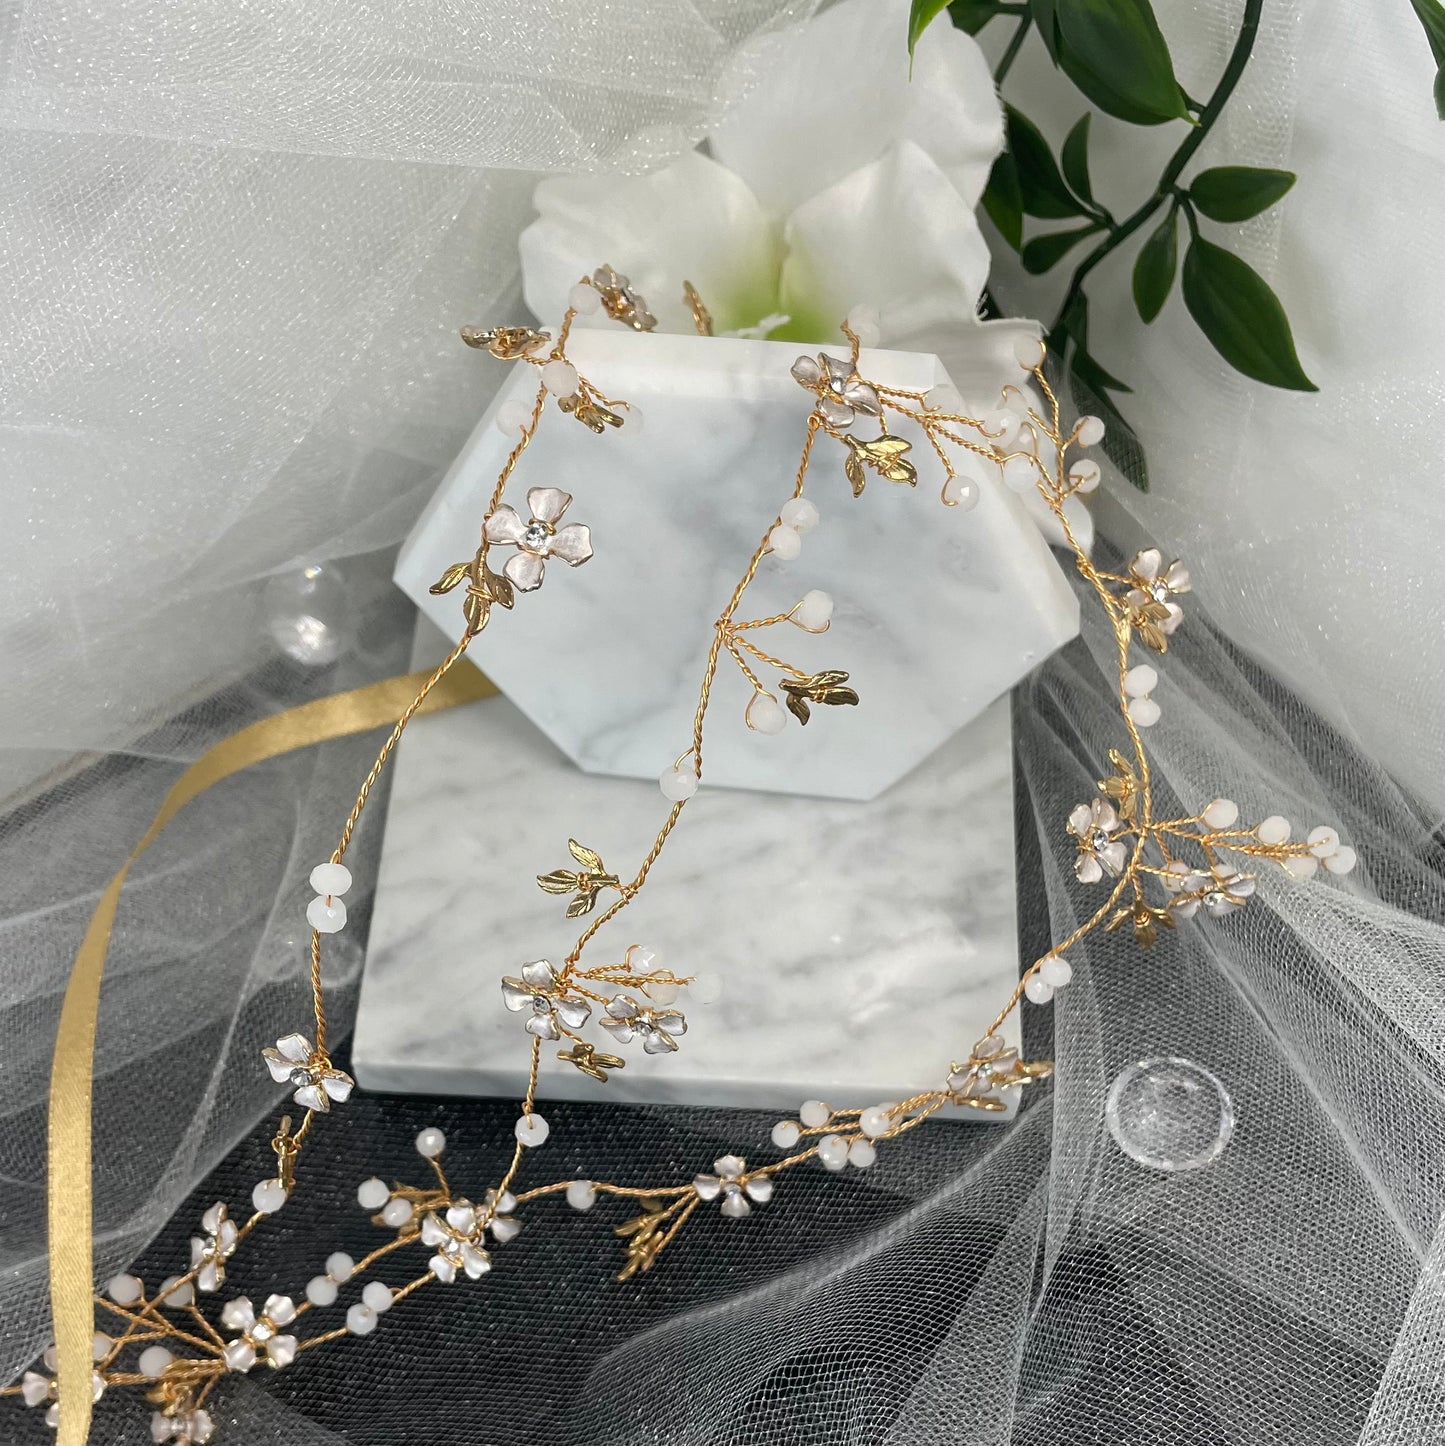 Stunning Eternal Wedding Hair Vine adorned with sparkling crystals on a goldish Rosegold wire, featuring a delicate leaf and floral design, perfect for enhancing bridal hairstyles with natural elegance.